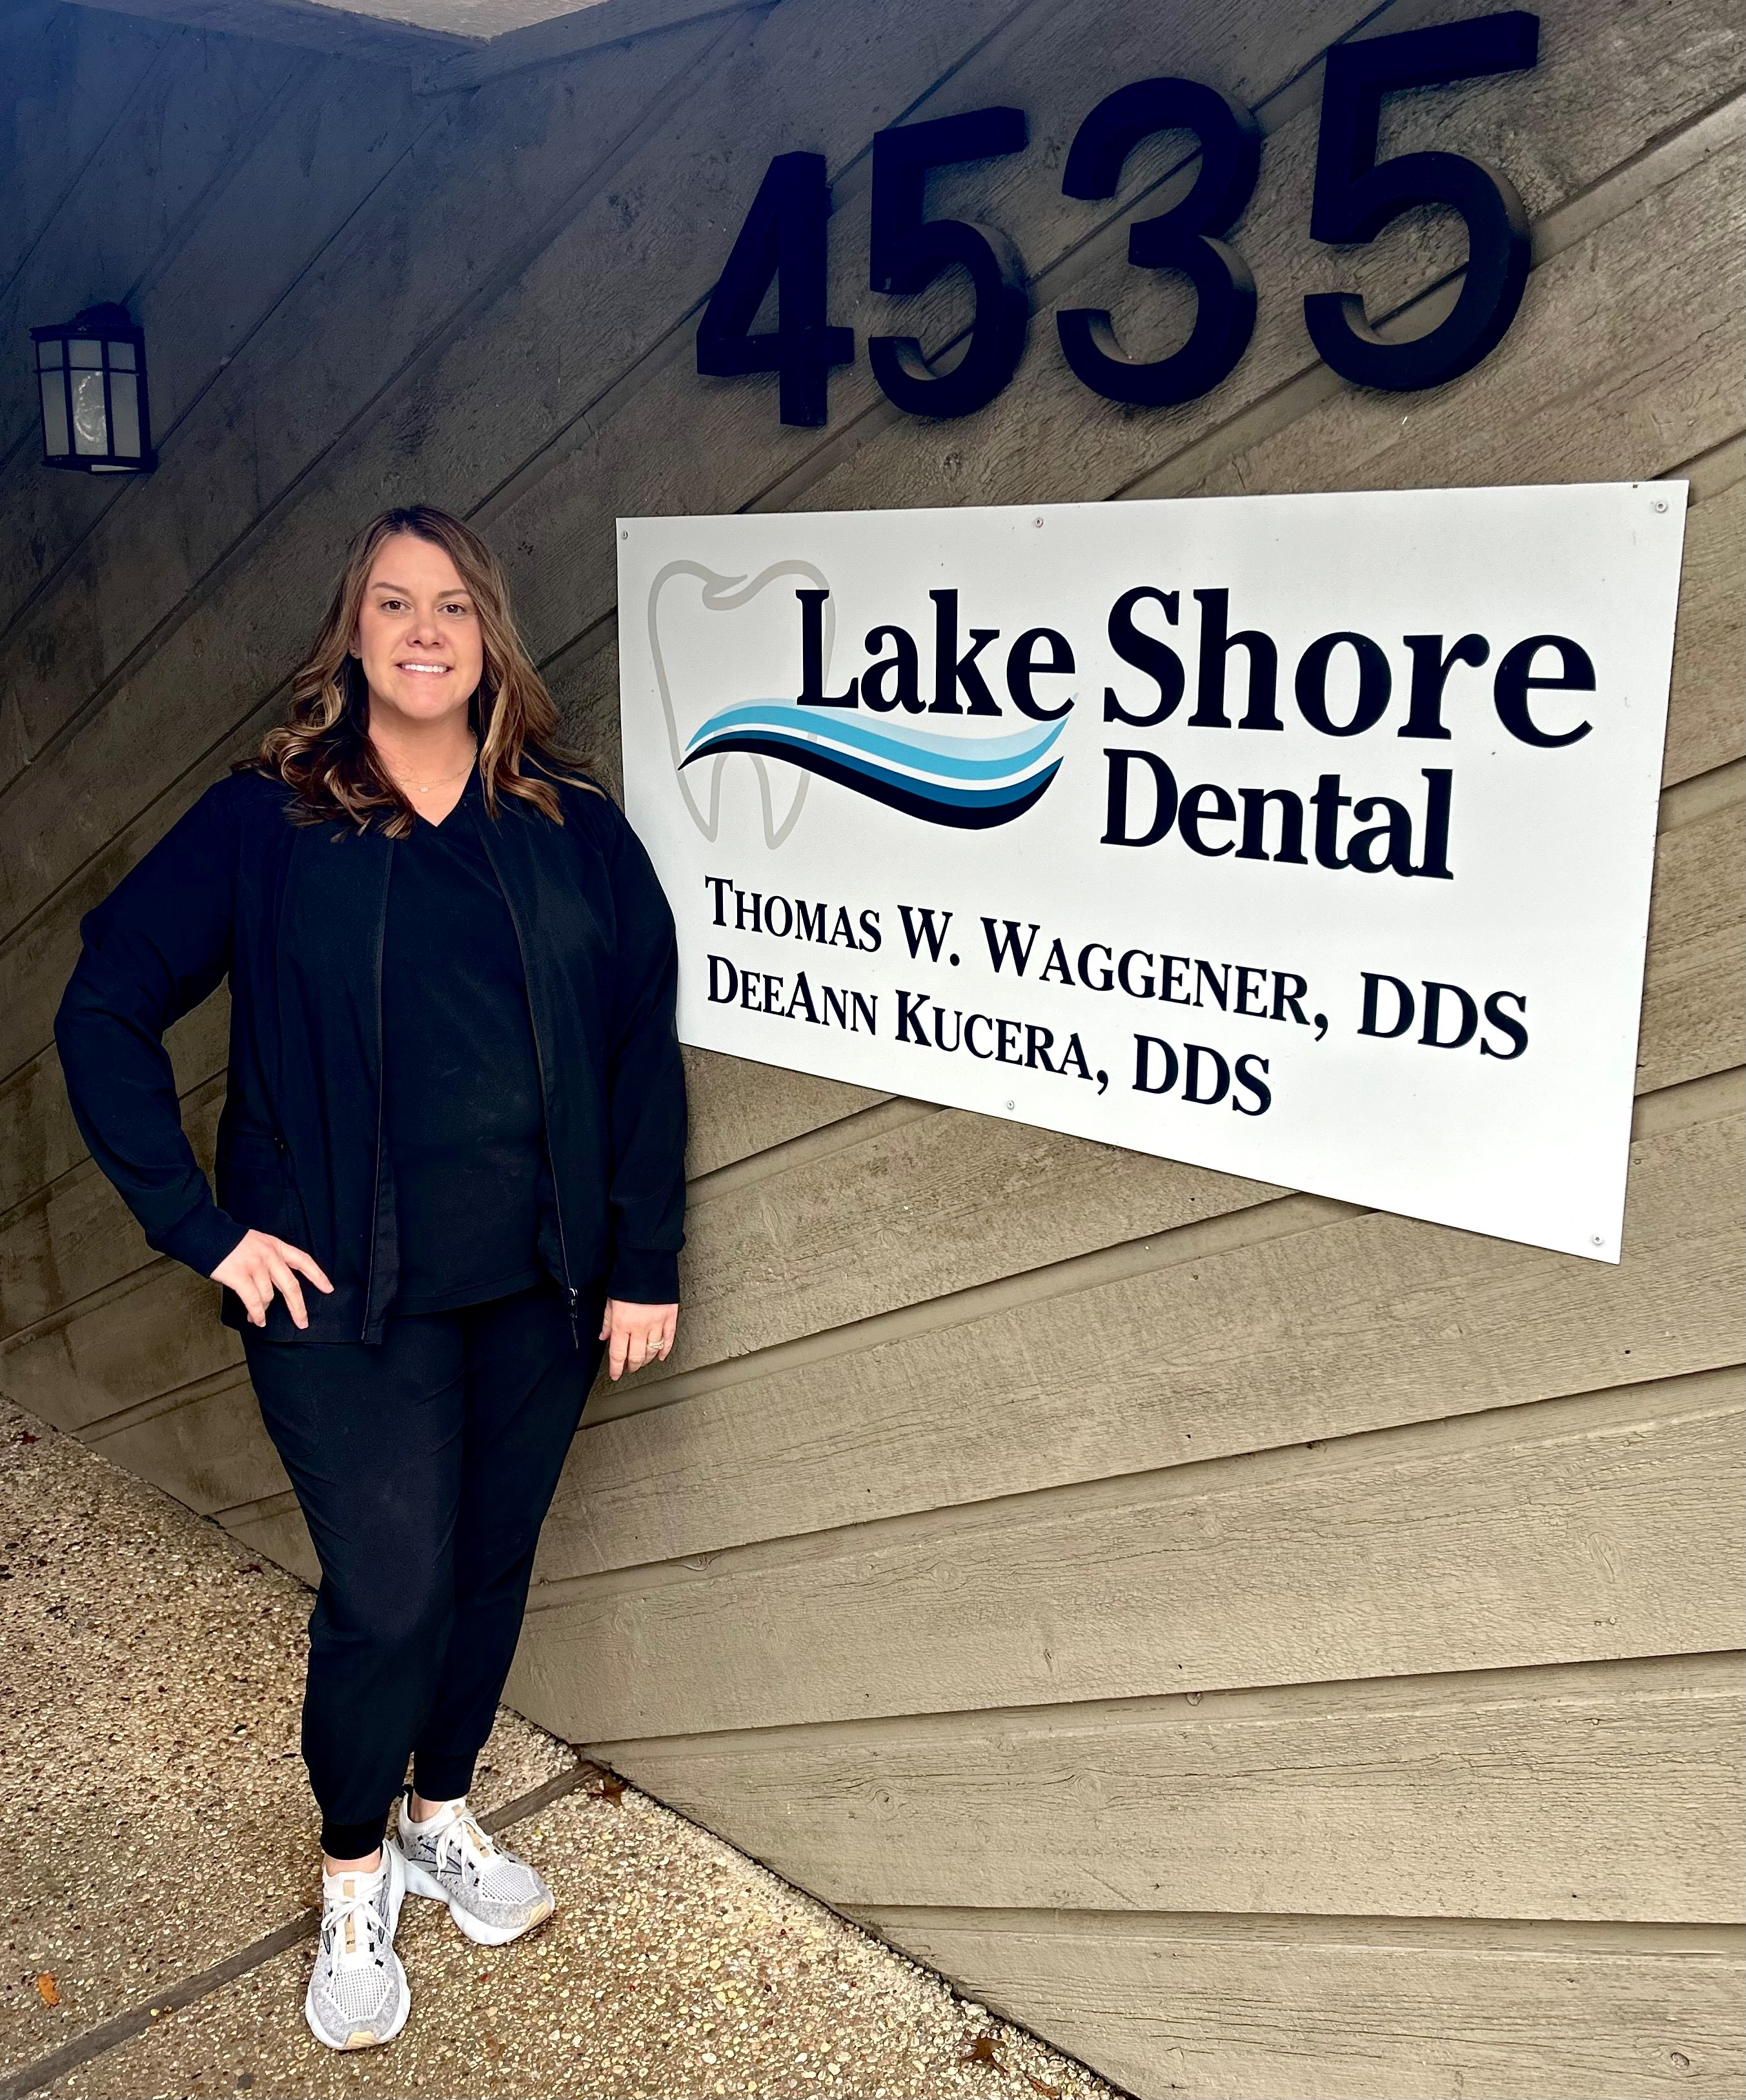 Lake Shore Dental 
4535 Lake Shore Dr, 
Waco, TX 76710
(254) 776-7622
https://lakeshoredentalwaco.com

Our dentist office in Waco TX proudly offers compassionate, high-quality dental care for our local community. We provide general dentistry, restorative dentistry, and cosmetic dentistry services for patients of all ages. Call us to schedule an appointment today!